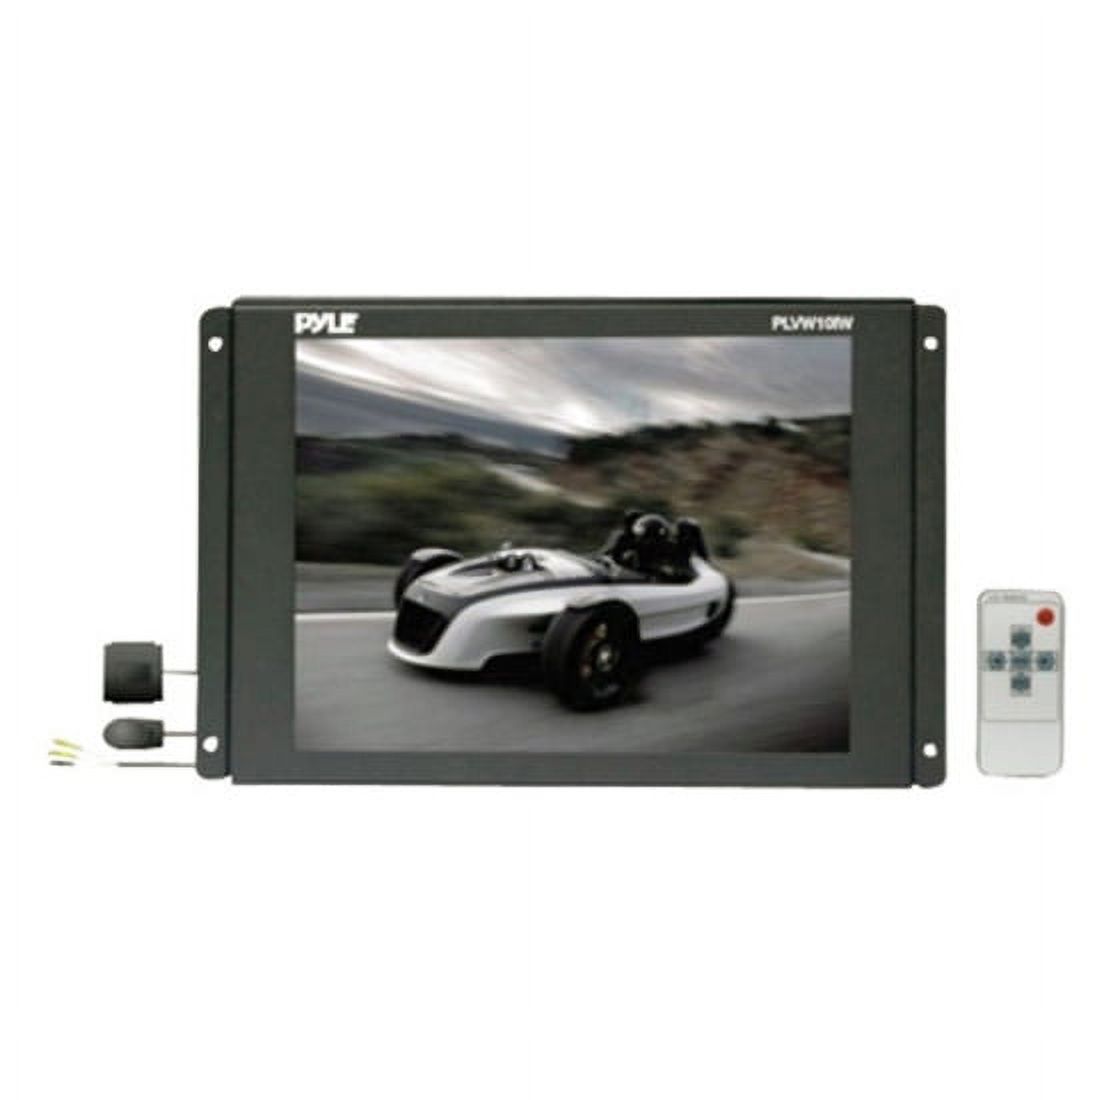 Pyle PLVW10IW 10.4" In-Wall Mount TFT LCD Flat Panel Monitor w/VGA Input - image 1 of 3